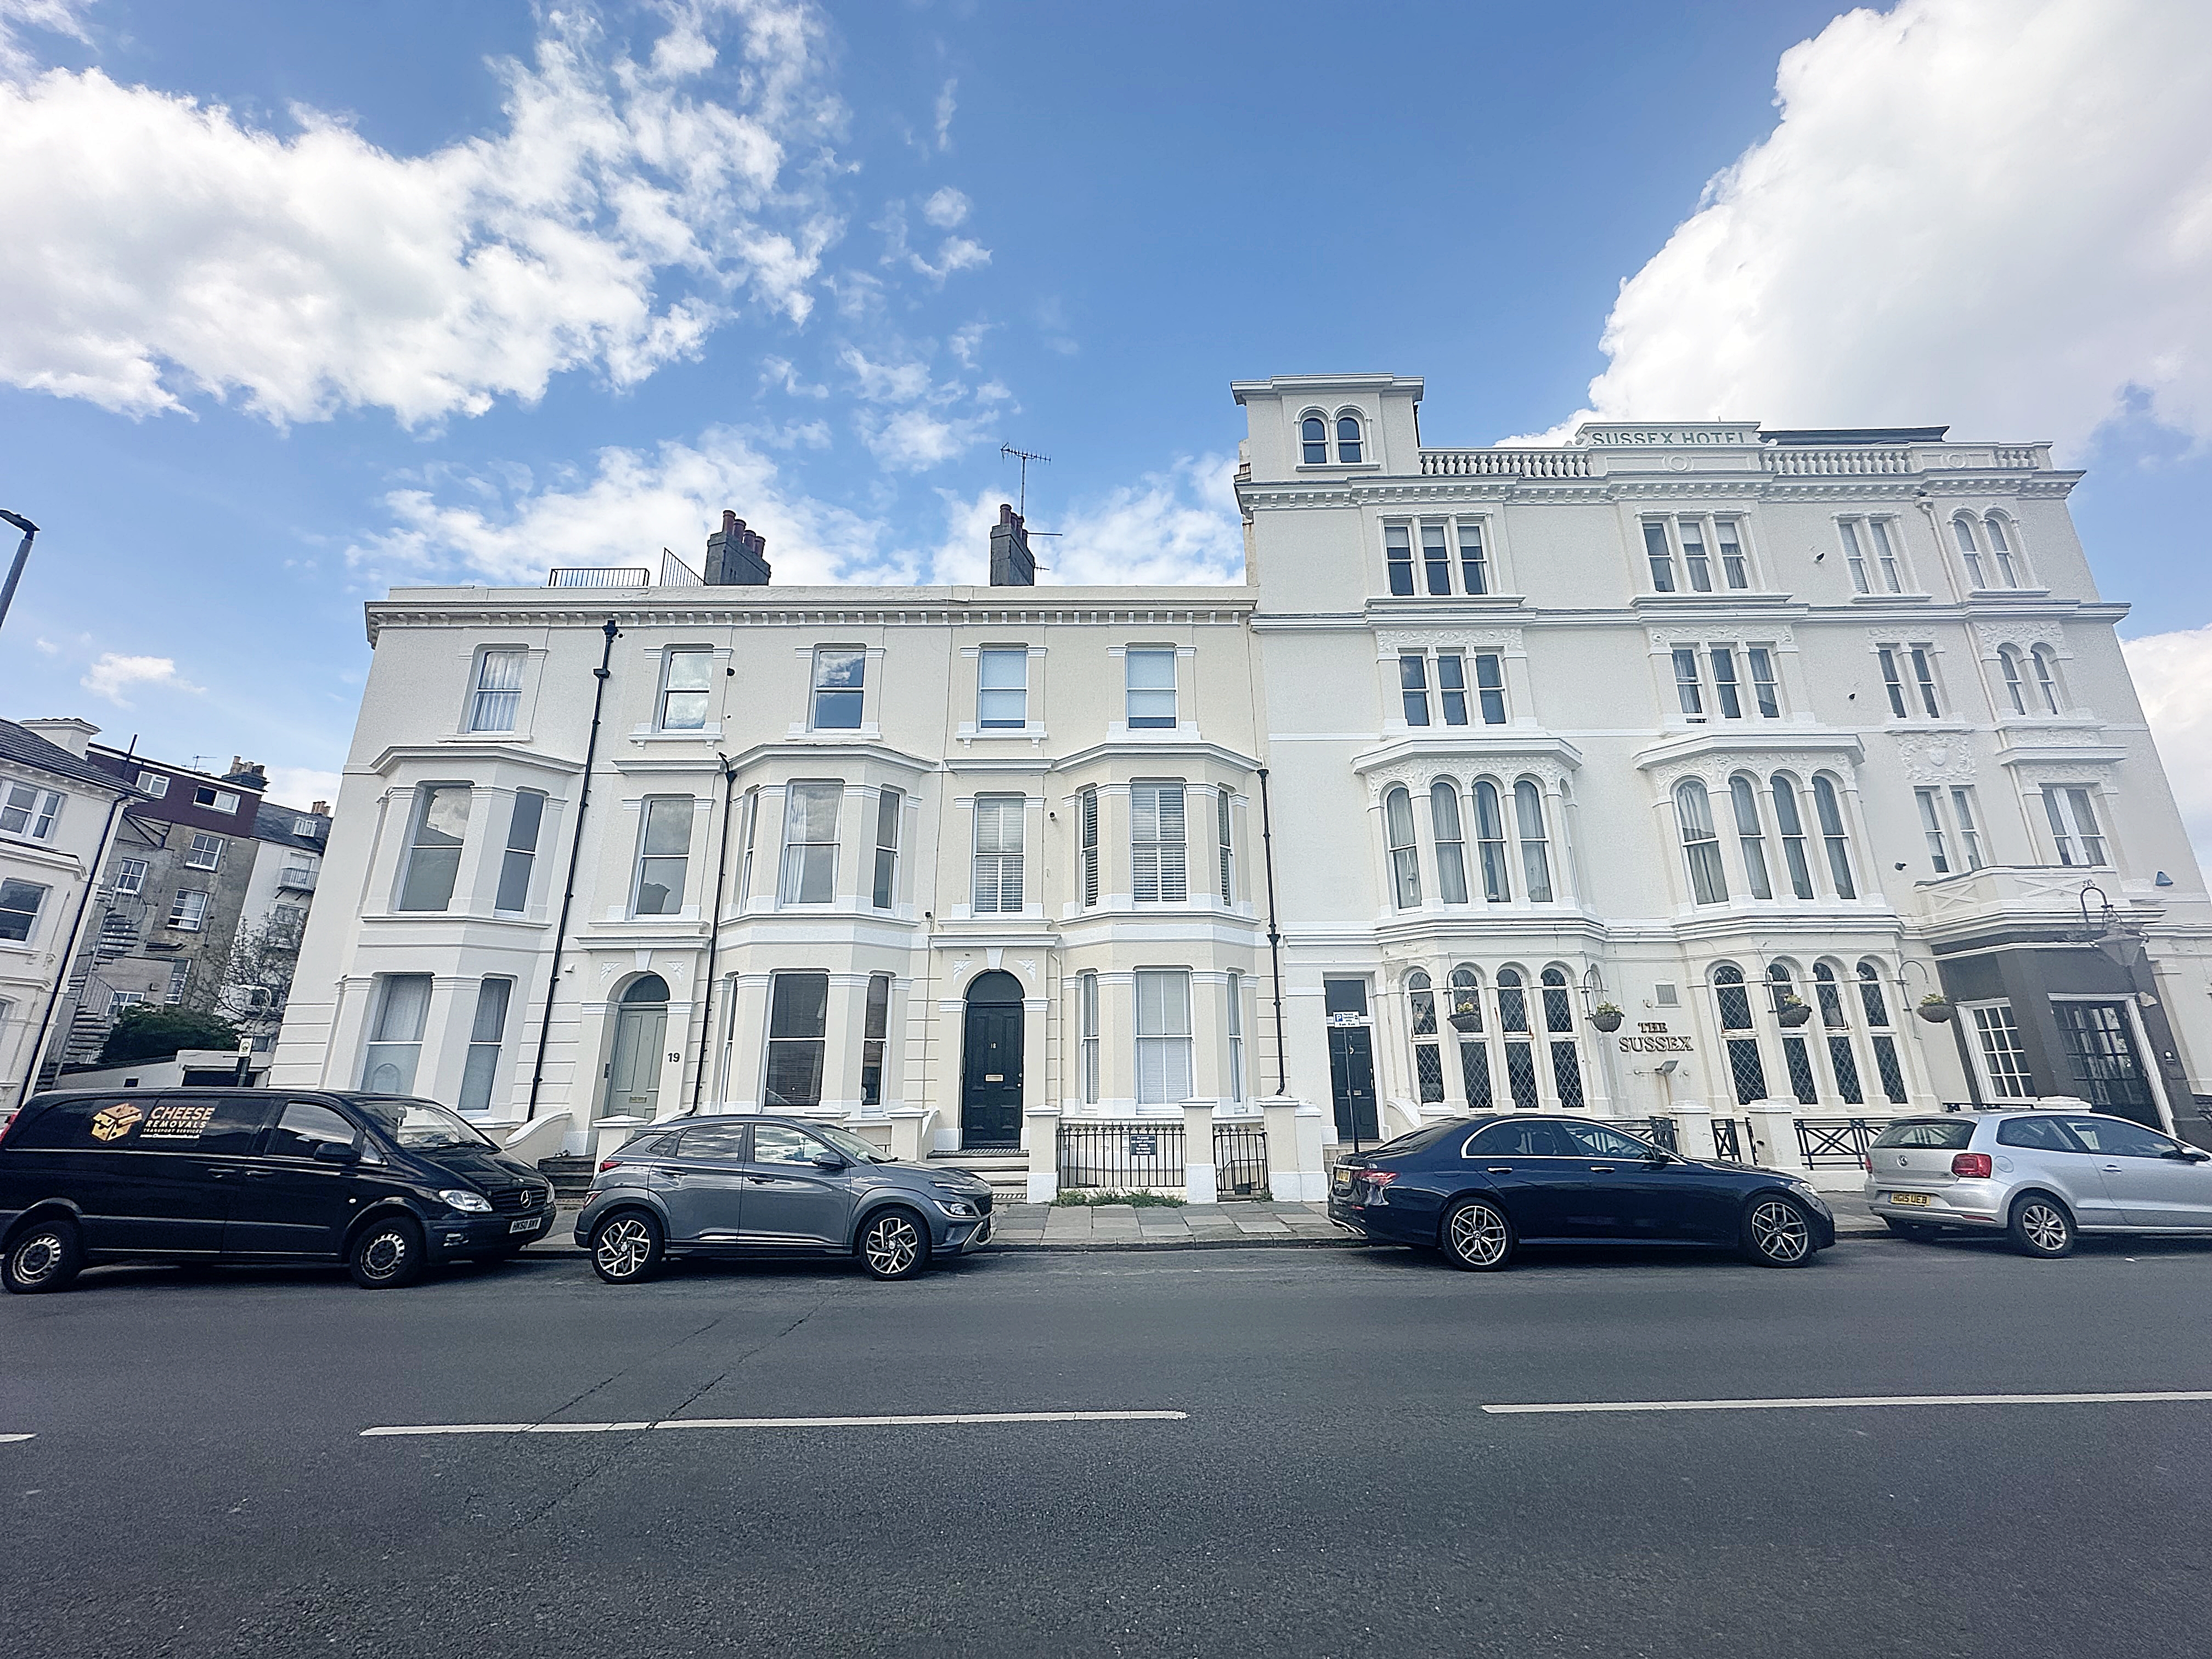 St. Catherines Terrace, Hove, BN3 2RH